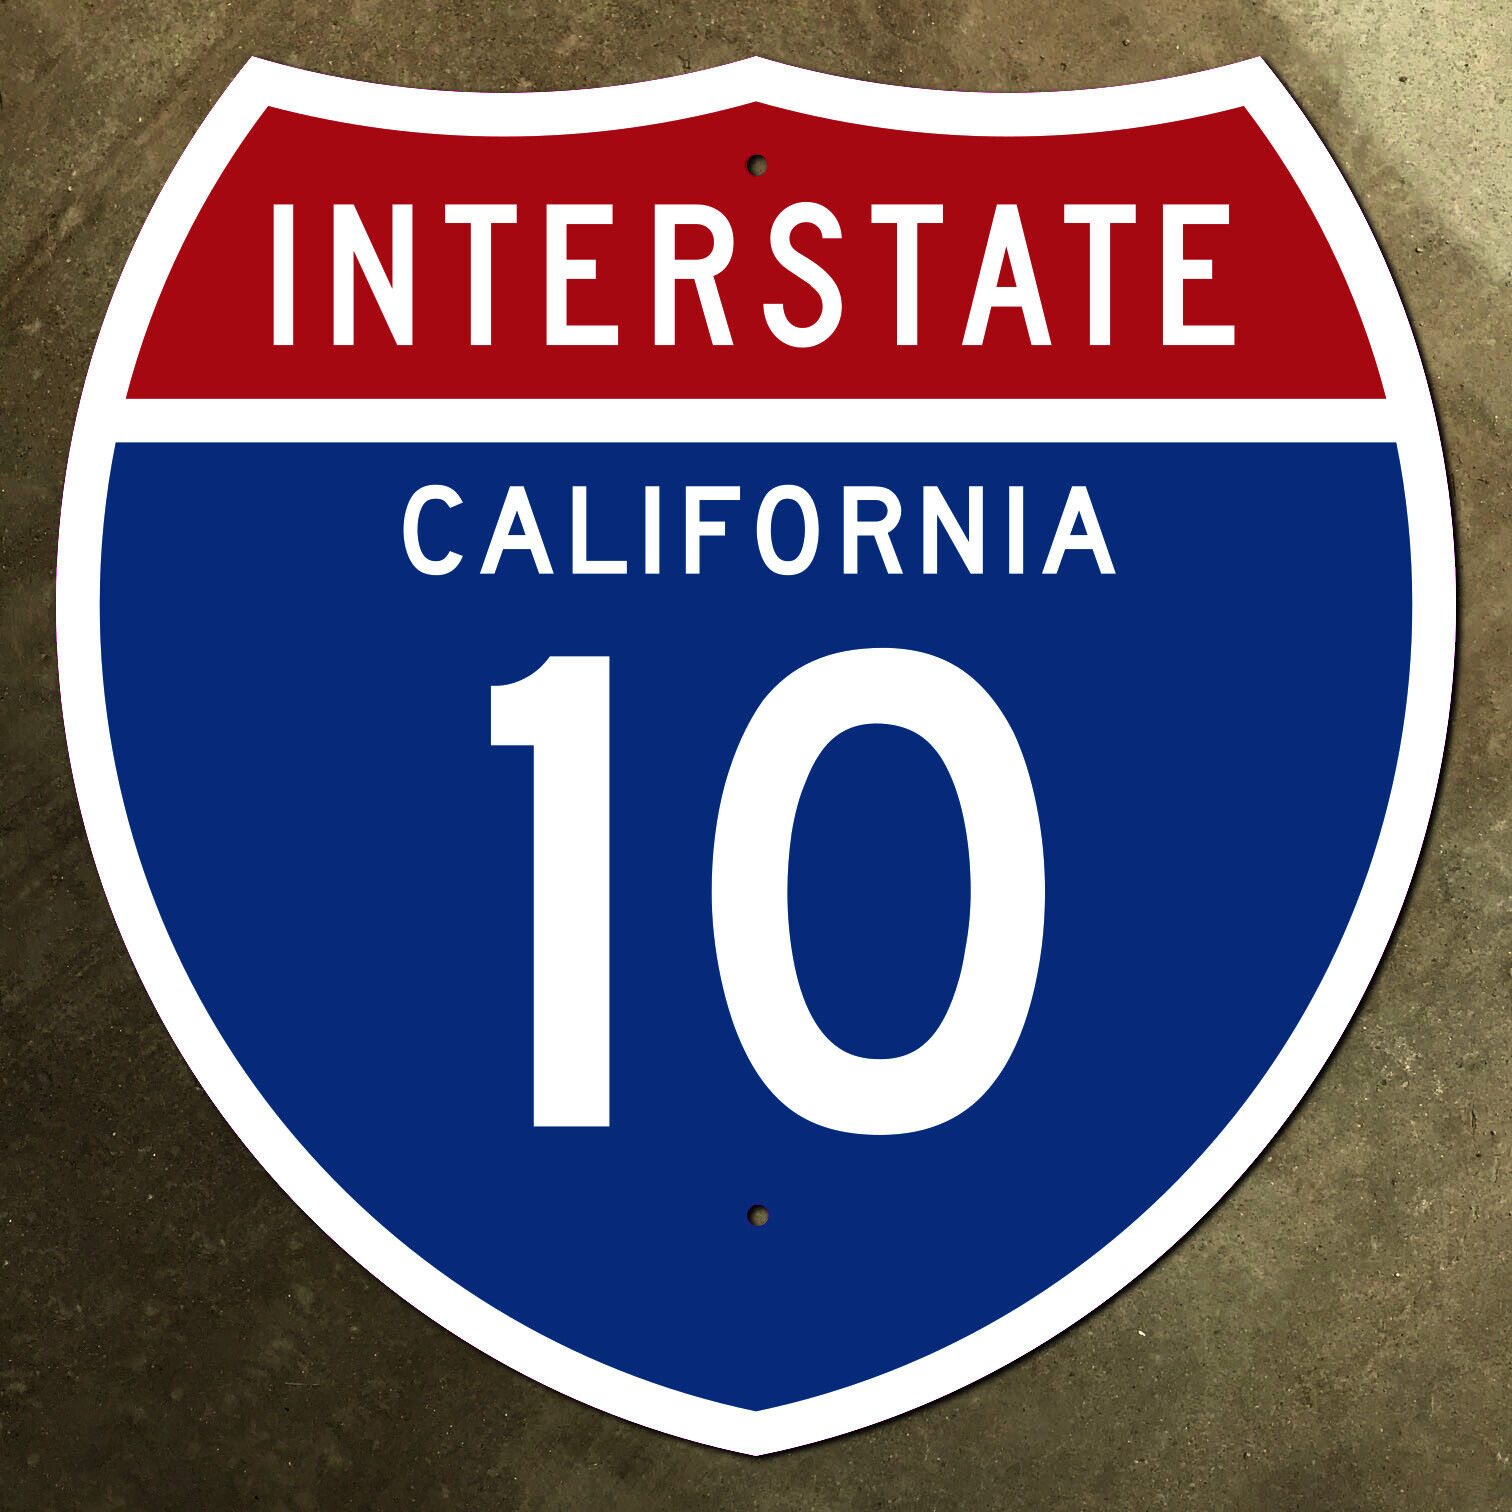 California interstate route 10 highway marker road sign 1957 Los Angeles 12x12